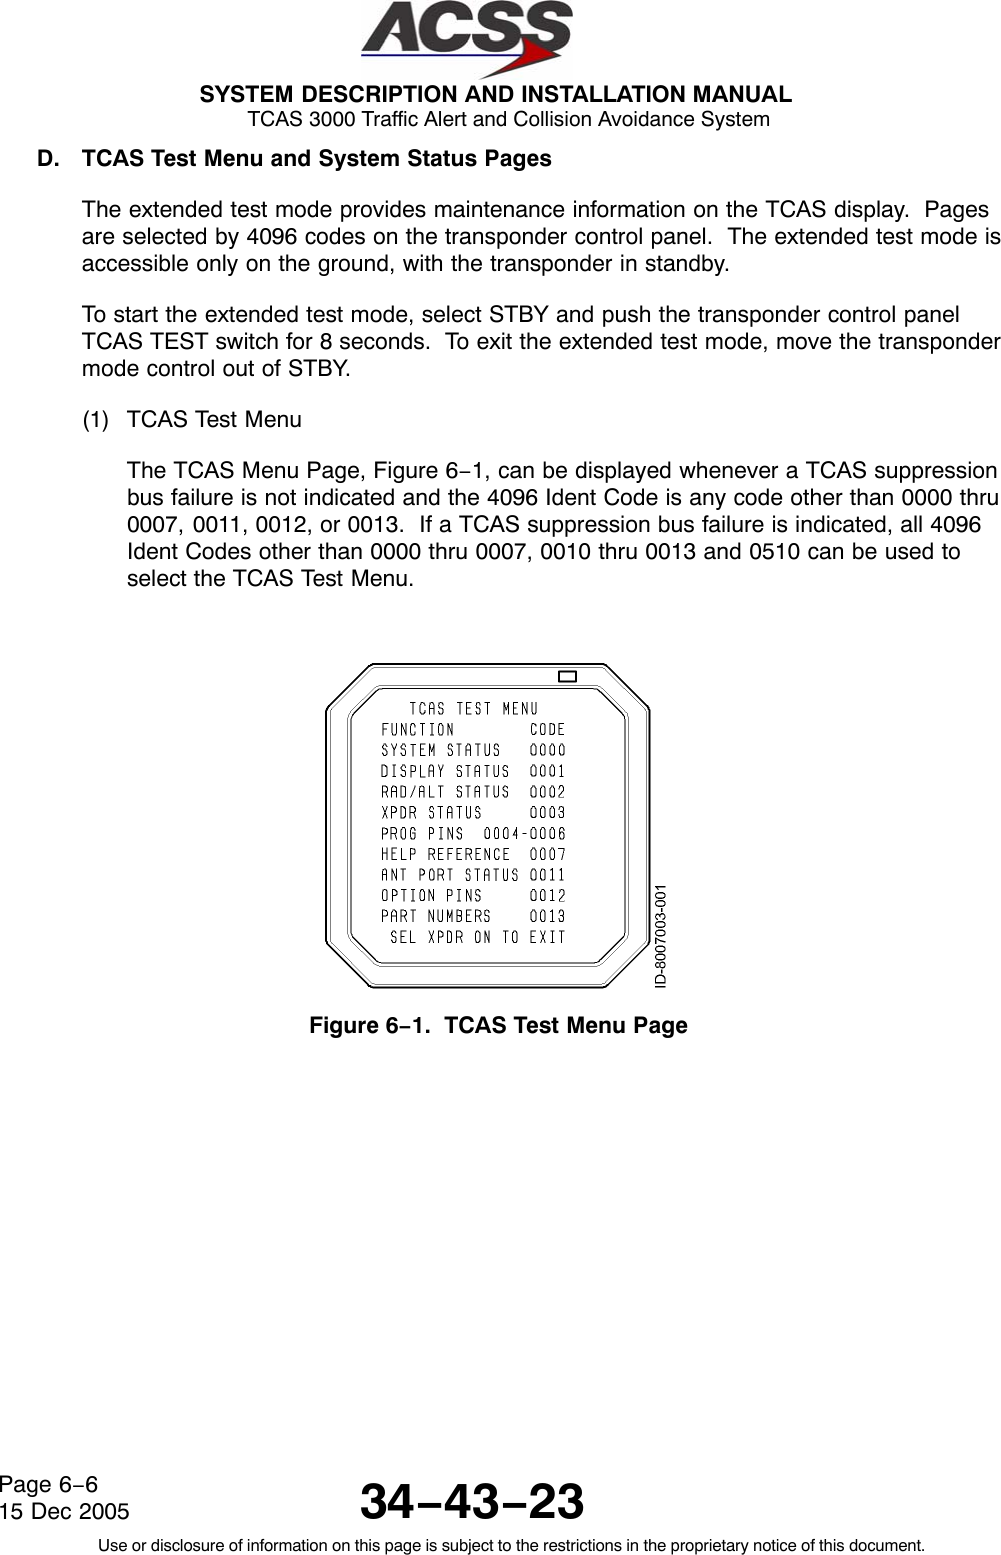  SYSTEM DESCRIPTION AND INSTALLATION MANUAL TCAS 3000 Traffic Alert and Collision Avoidance System34−43−23Use or disclosure of information on this page is subject to the restrictions in the proprietary notice of this document.Page 6−615 Dec 2005D. TCAS Test Menu and System Status PagesThe extended test mode provides maintenance information on the TCAS display.  Pagesare selected by 4096 codes on the transponder control panel.  The extended test mode isaccessible only on the ground, with the transponder in standby.To start the extended test mode, select STBY and push the transponder control panelTCAS TEST switch for 8 seconds.  To exit the extended test mode, move the transpondermode control out of STBY.(1) TCAS Test MenuThe TCAS Menu Page, Figure 6−1, can be displayed whenever a TCAS suppressionbus failure is not indicated and the 4096 Ident Code is any code other than 0000 thru0007, 0011, 0012, or 0013.  If a TCAS suppression bus failure is indicated, all 4096Ident Codes other than 0000 thru 0007, 0010 thru 0013 and 0510 can be used toselect the TCAS Test Menu.Figure 6−1.  TCAS Test Menu Page